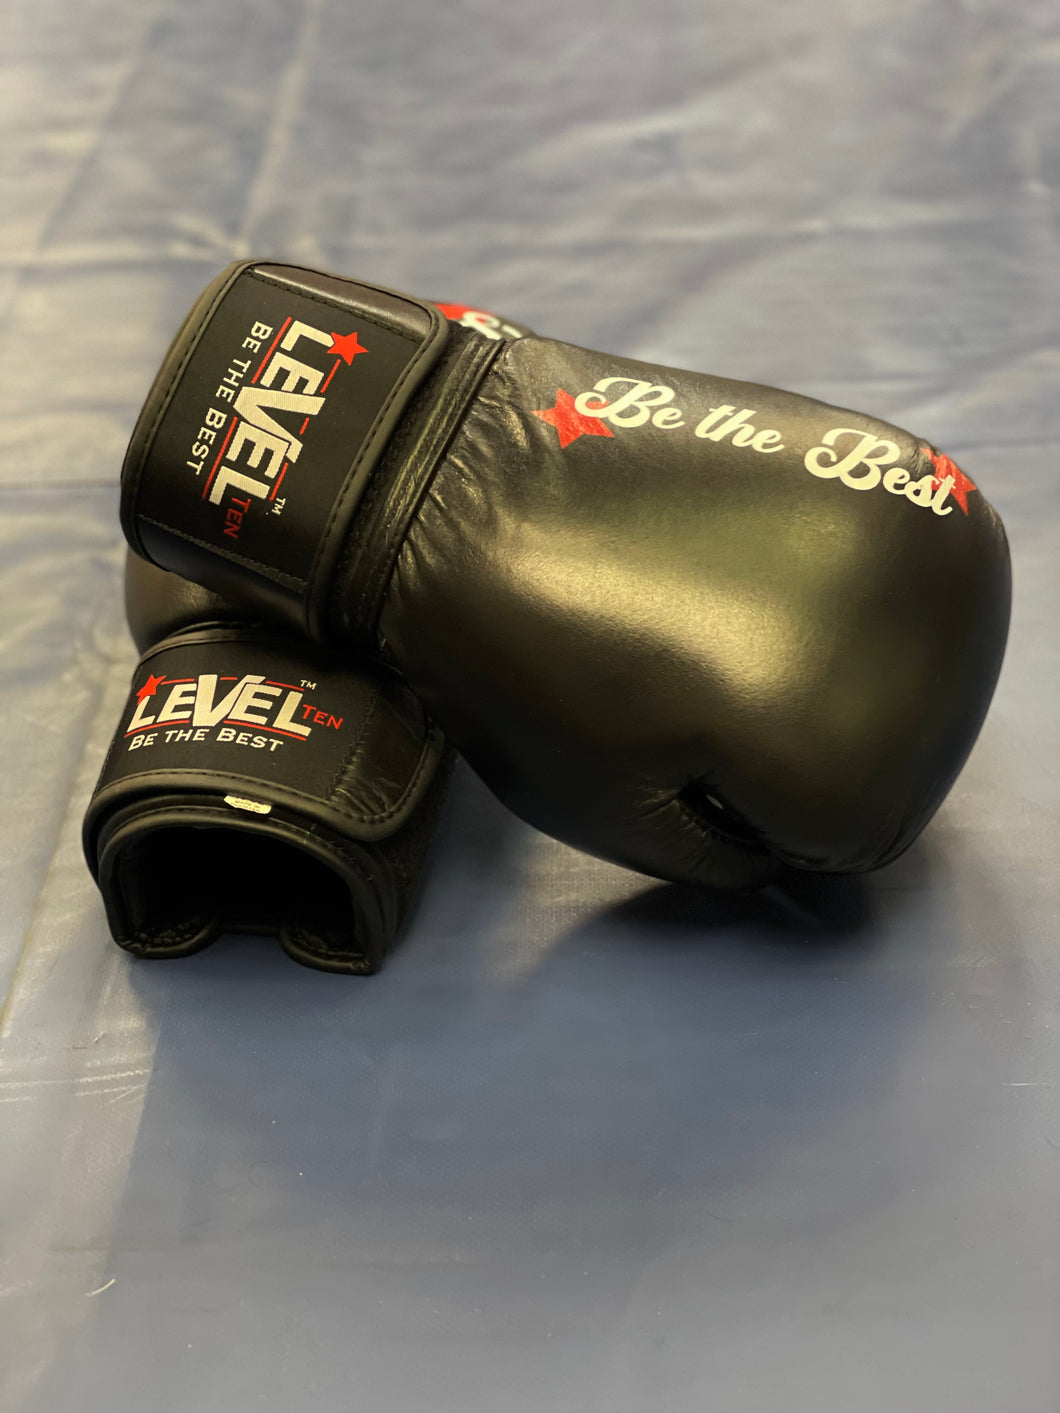 Be The Best - Level Ten™  Leather Training Gloves